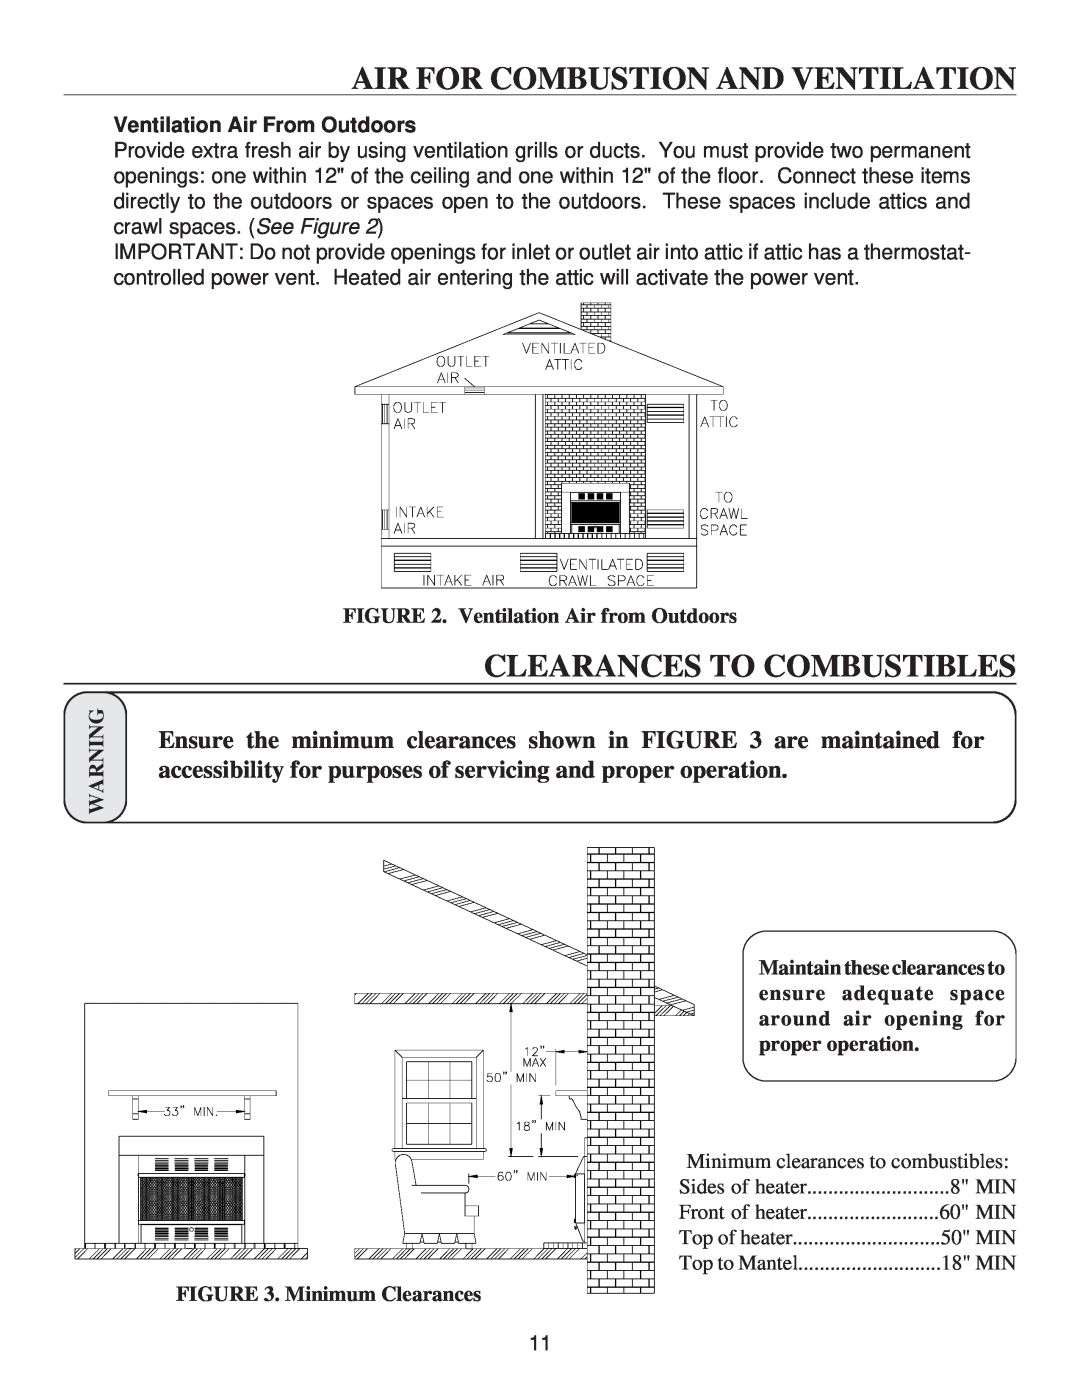 United States Stove VF30IL Clearances To Combustibles, Air For Combustion And Ventilation, Ventilation Air from Outdoors 